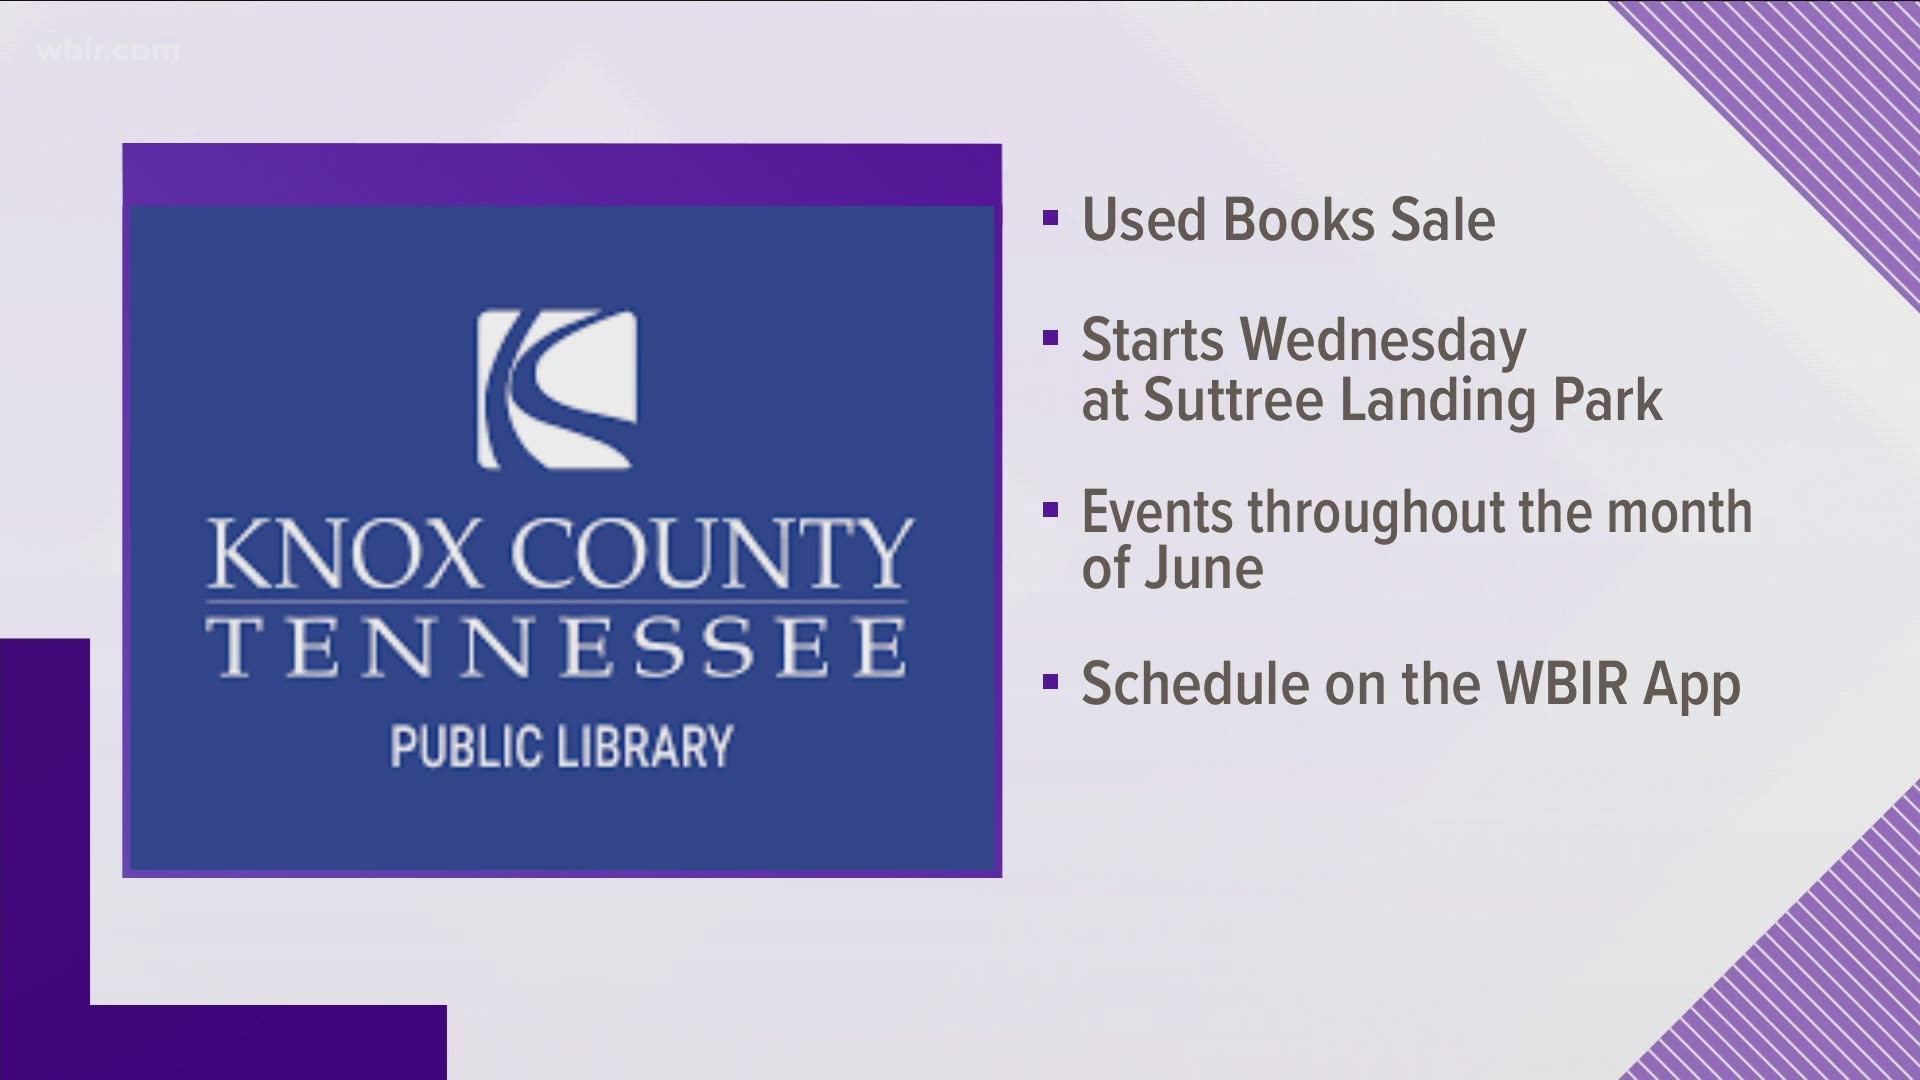 The Knox County friends of the Library's Used Books Sale is back!